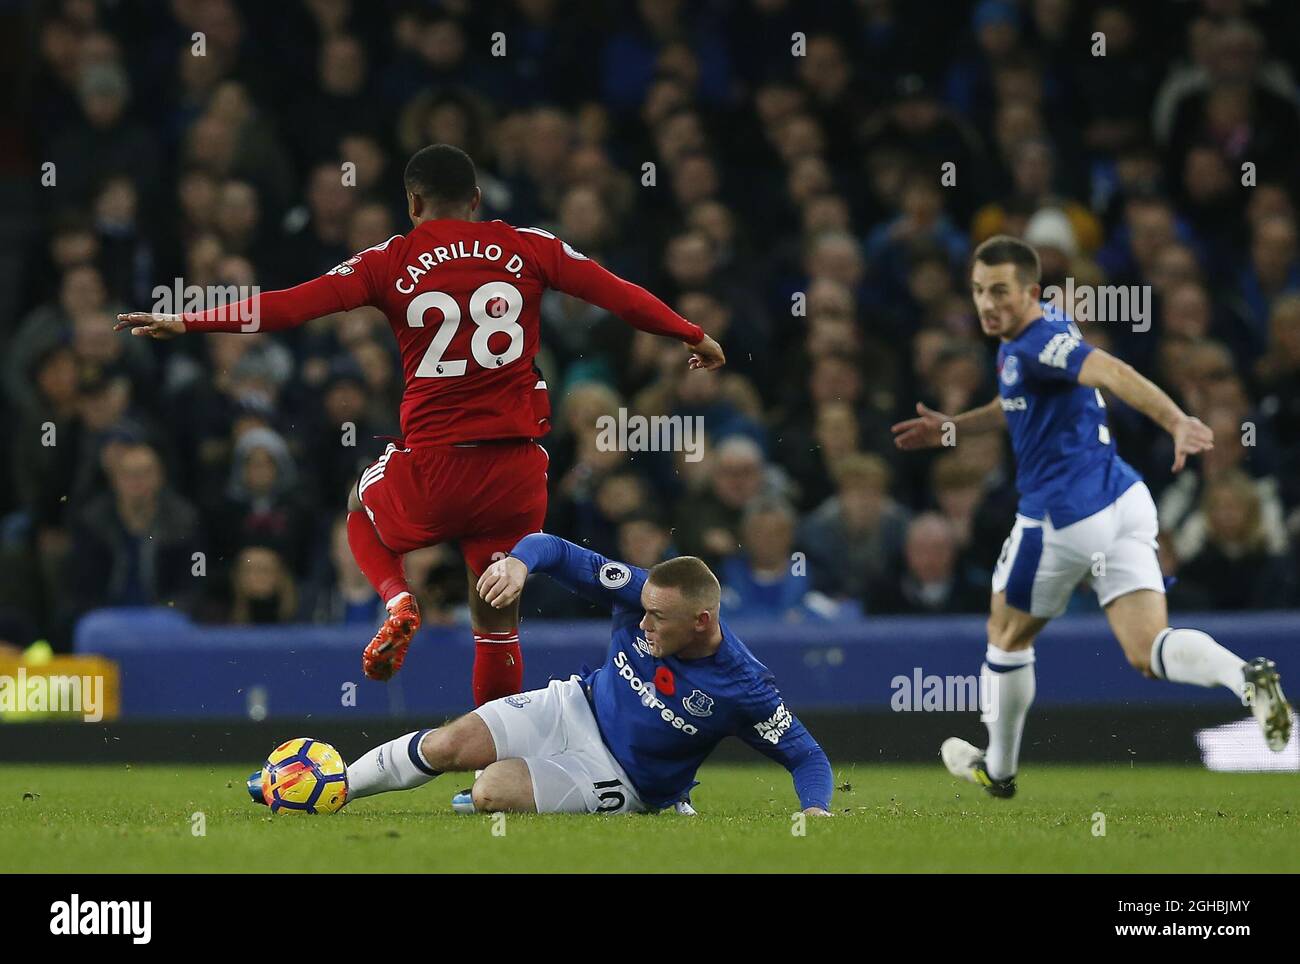 Wayne Rooney of Everton tackles Andre Carrillo of Watford during the premier league match at Goodison Park  Stadium, Liverpool. Picture date: 5th November 2017. Picture credit should read: Andrew Yates/Sportimage via PA Images Stock Photo